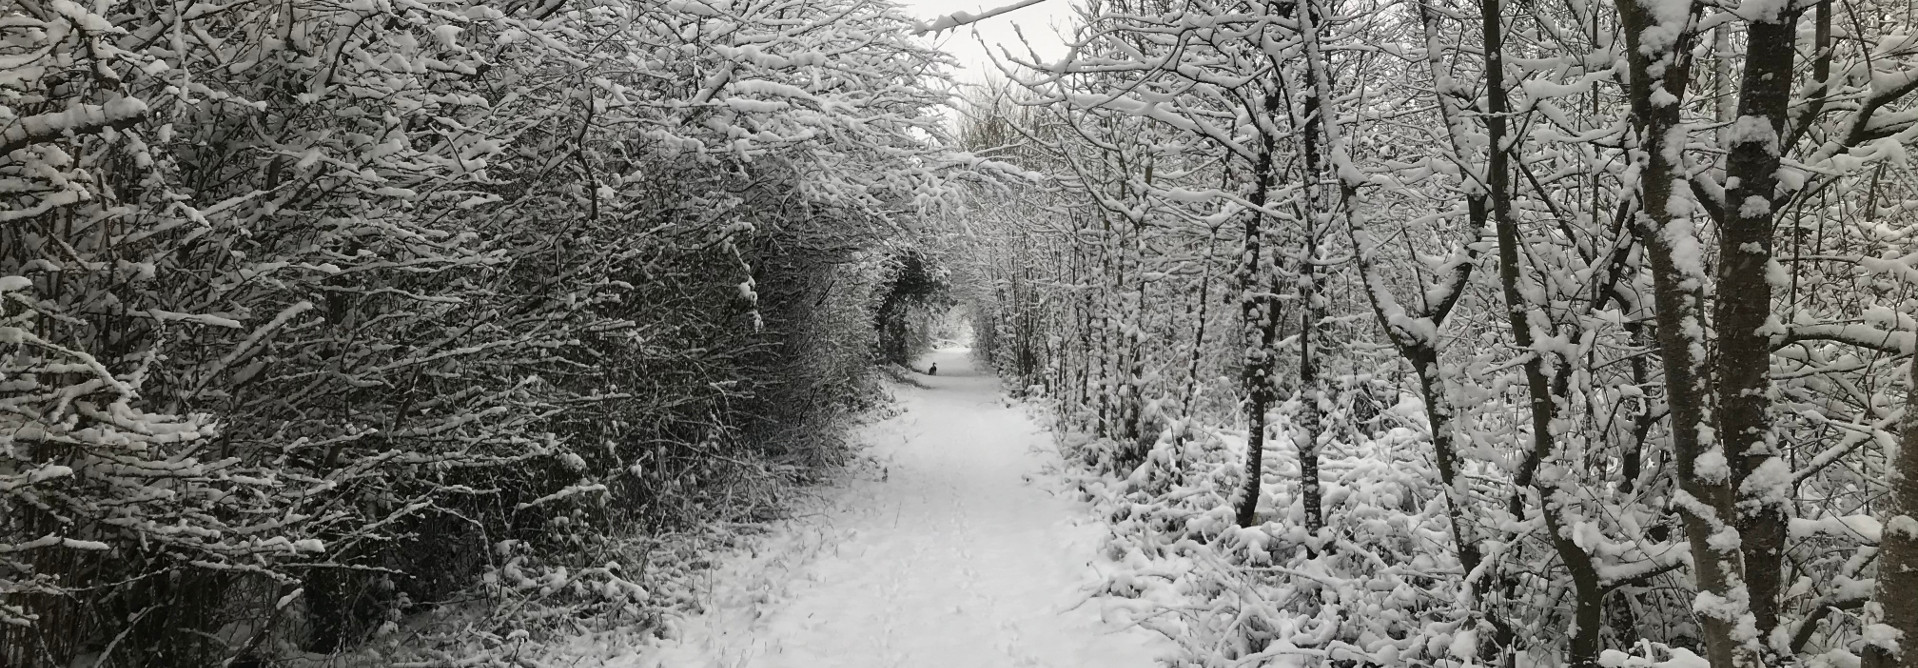 Snowy avenue in the National Forest, Hartshorne